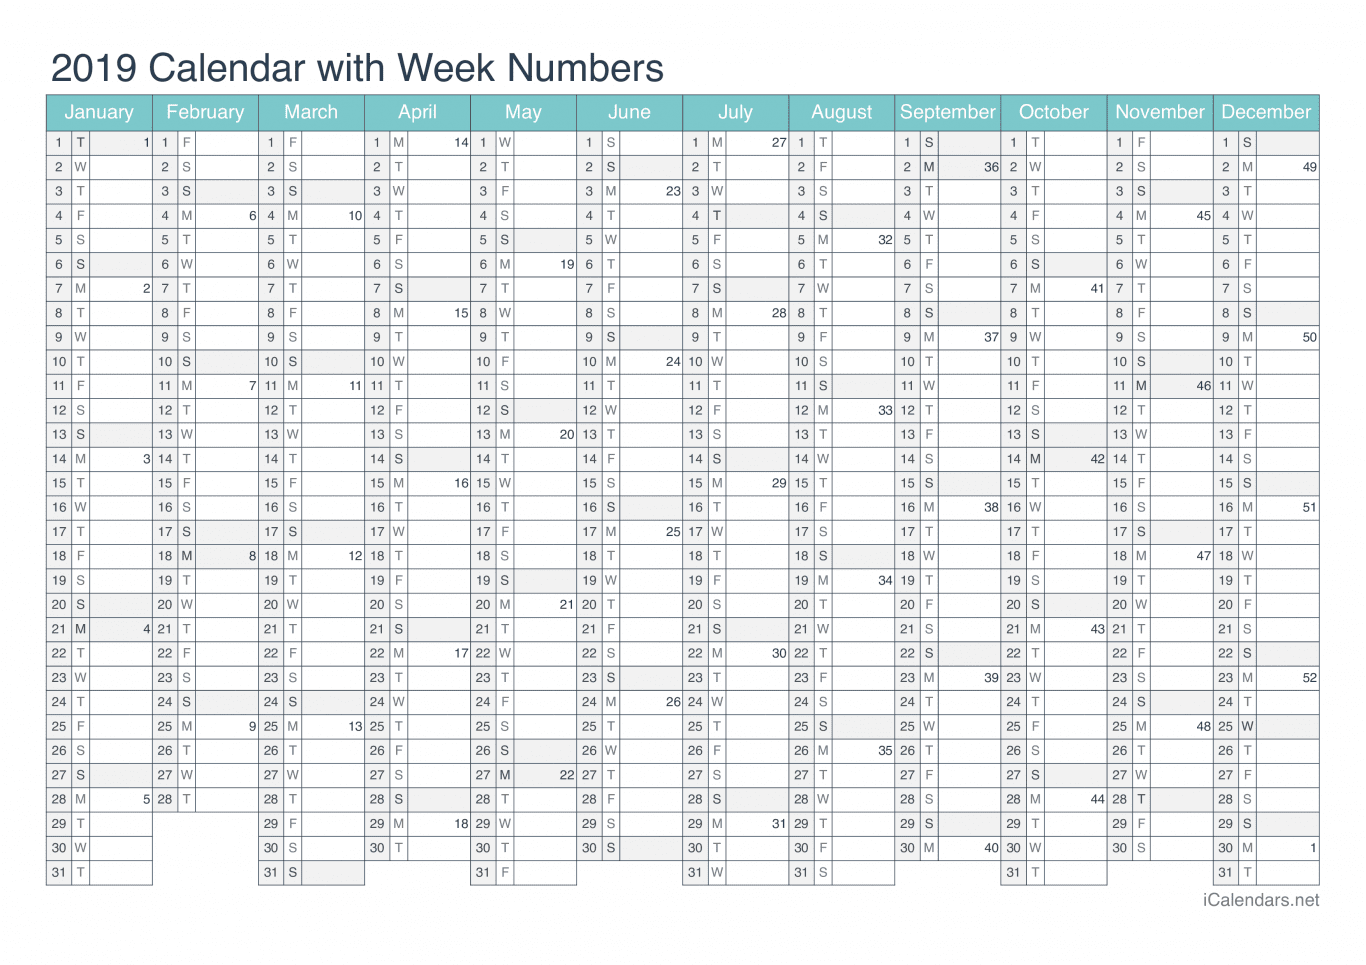 2019 Calendar with week numbers - Turquoise